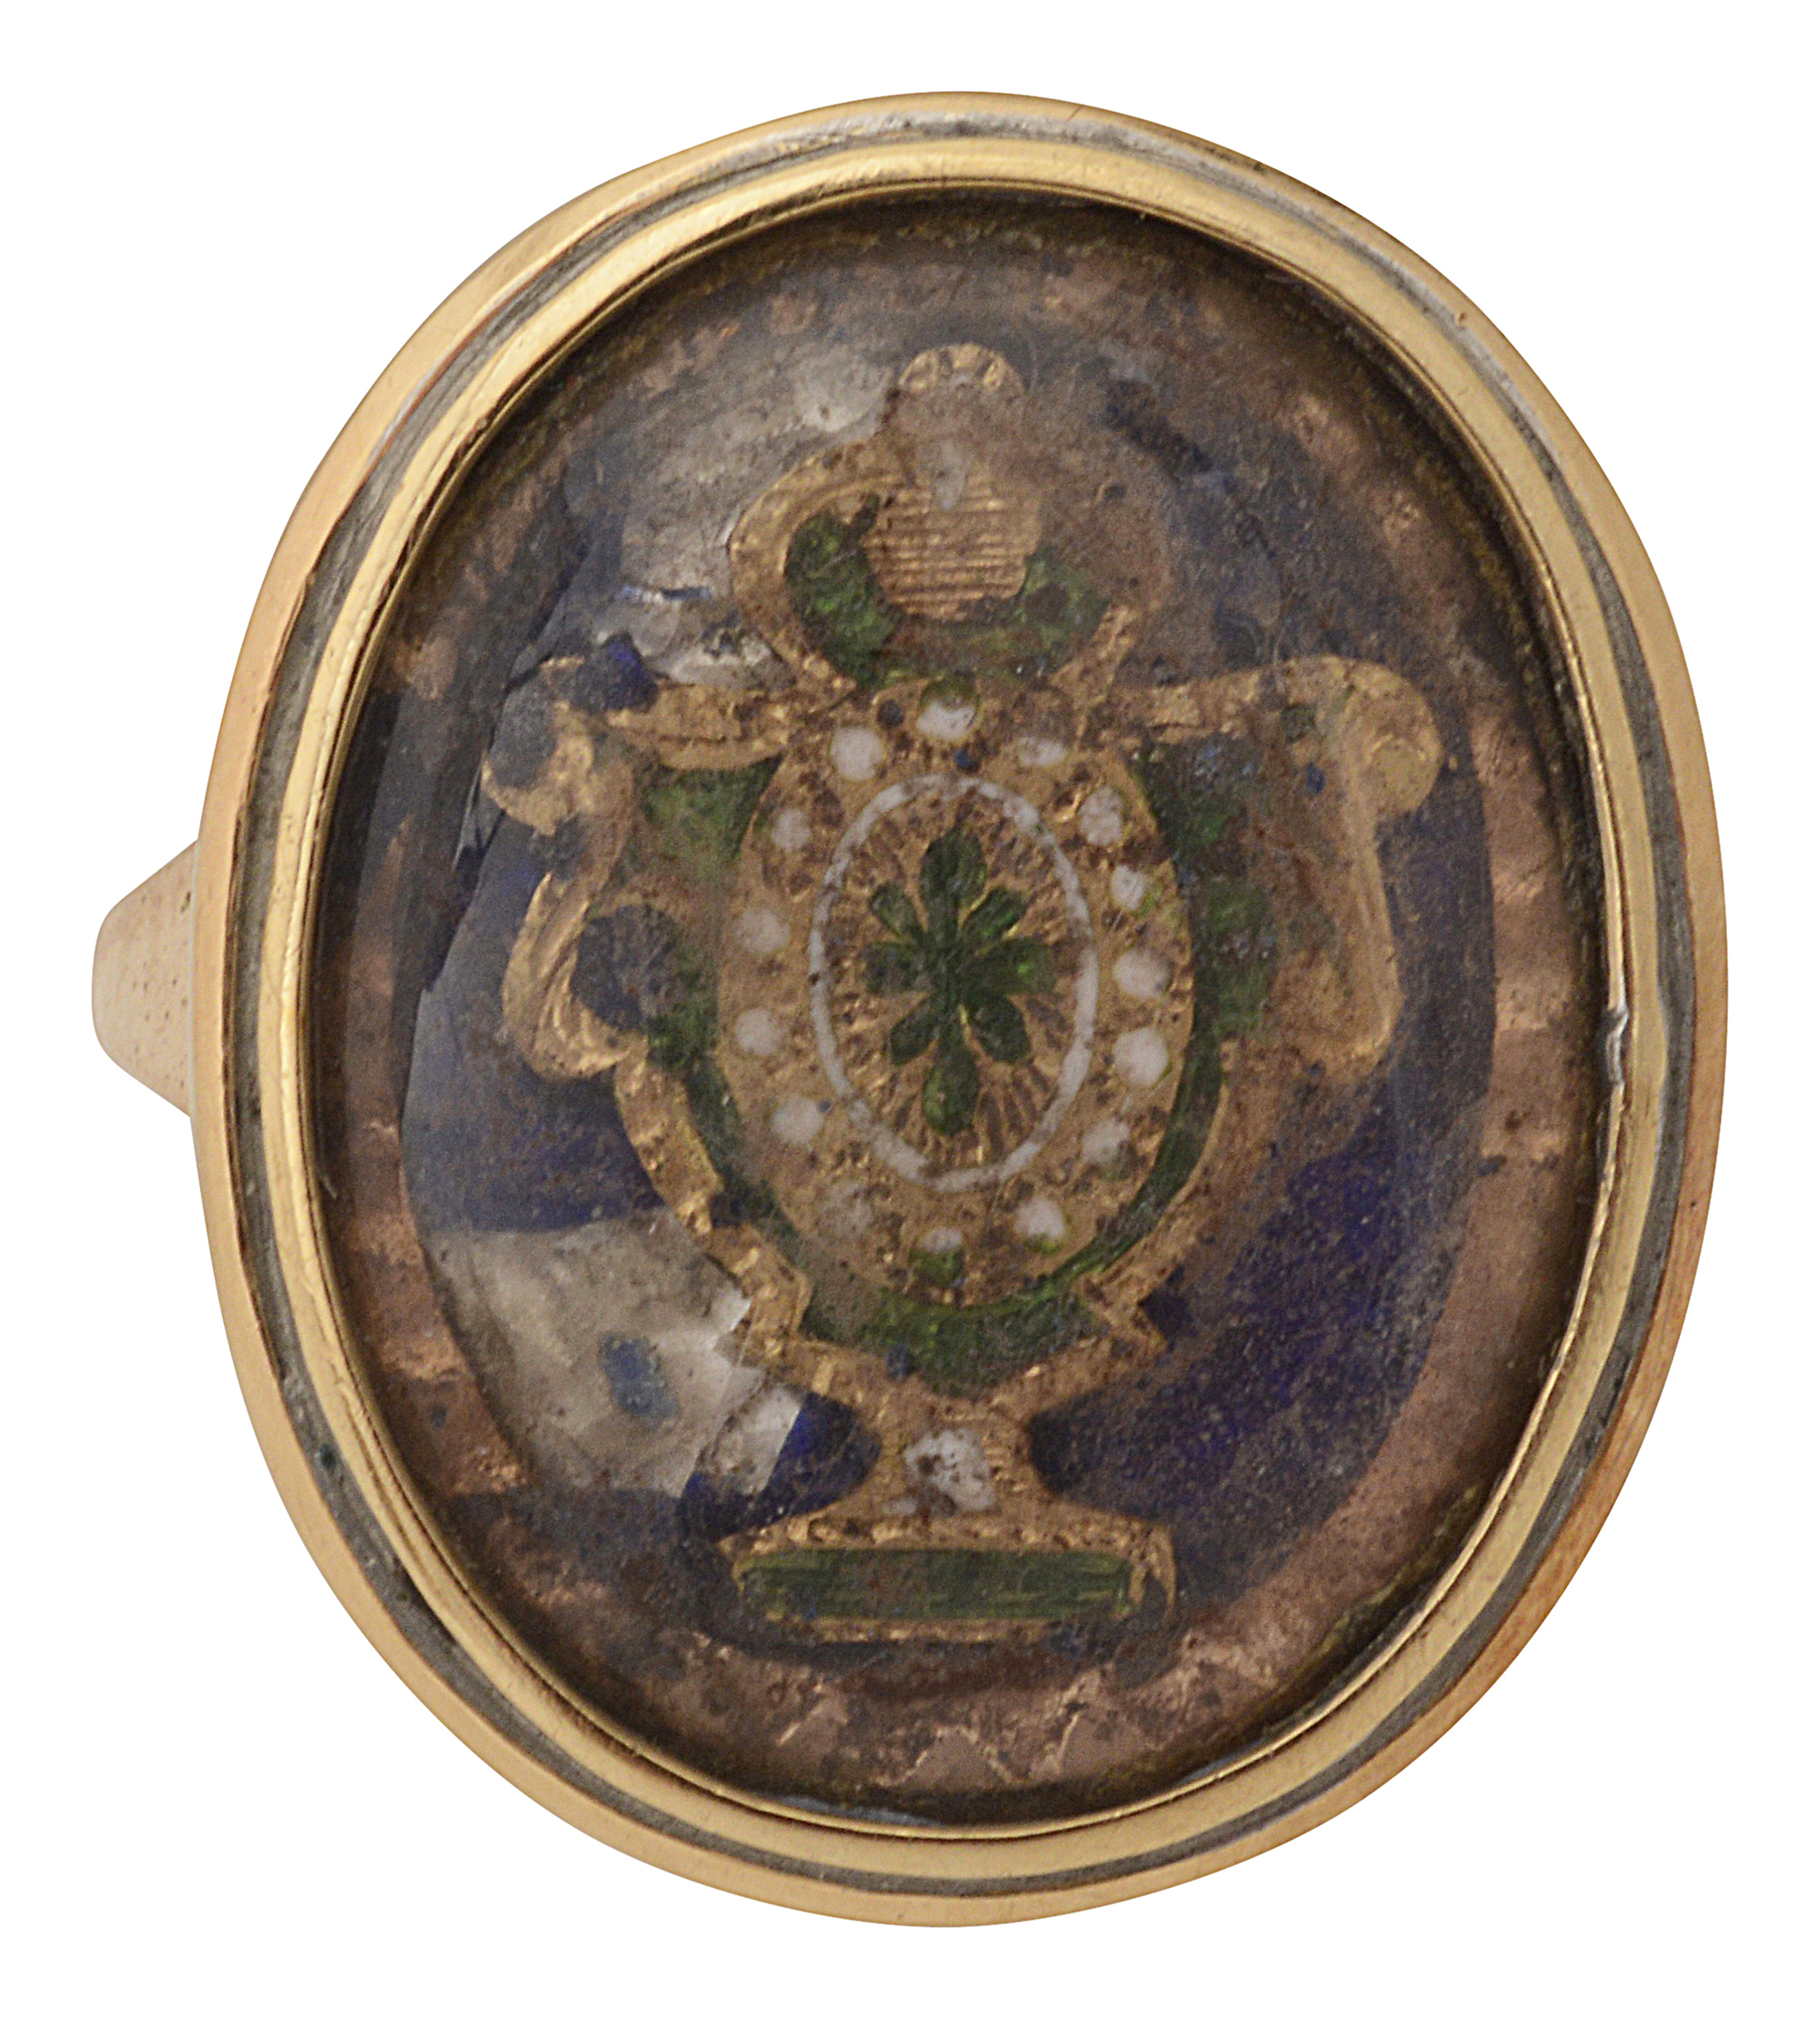 A mid/late 18th century enamel and yellow gold memorial ring